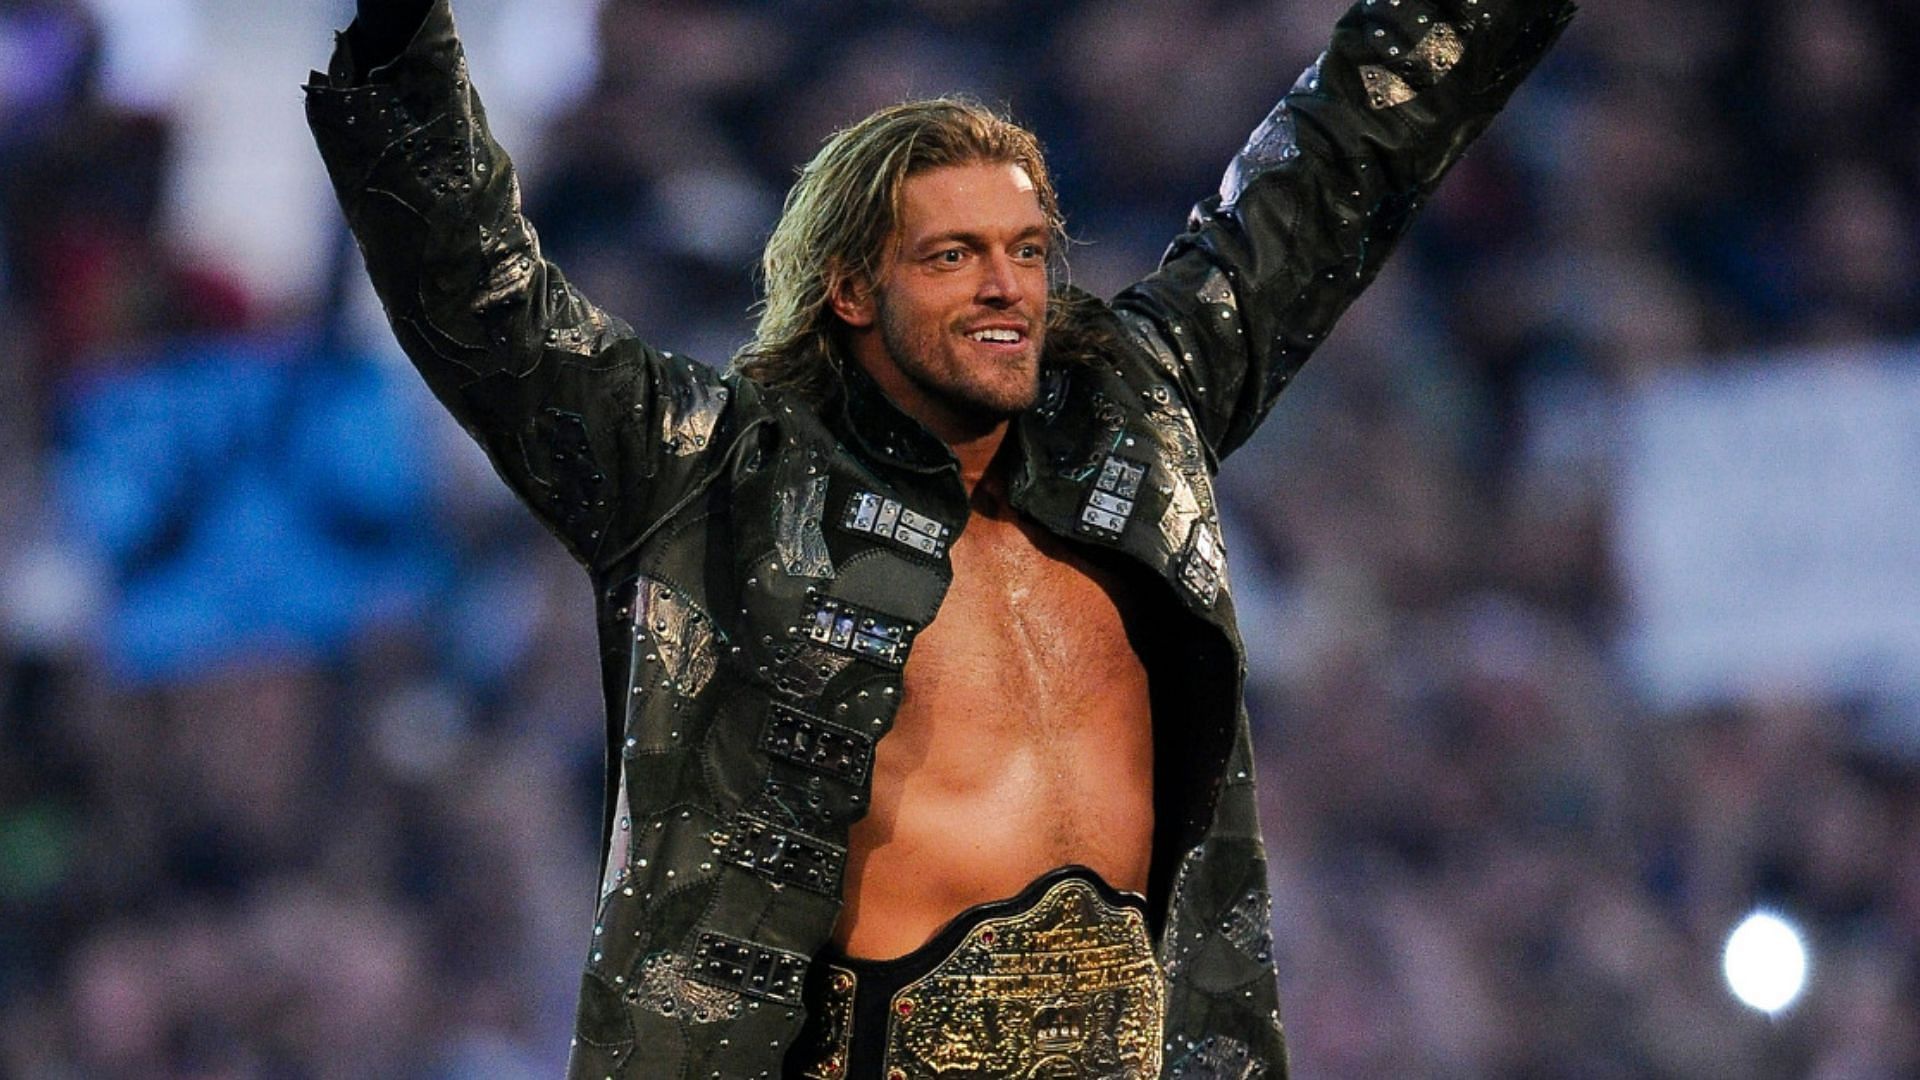 Edge is a 7-time World Heavyweight Champion.